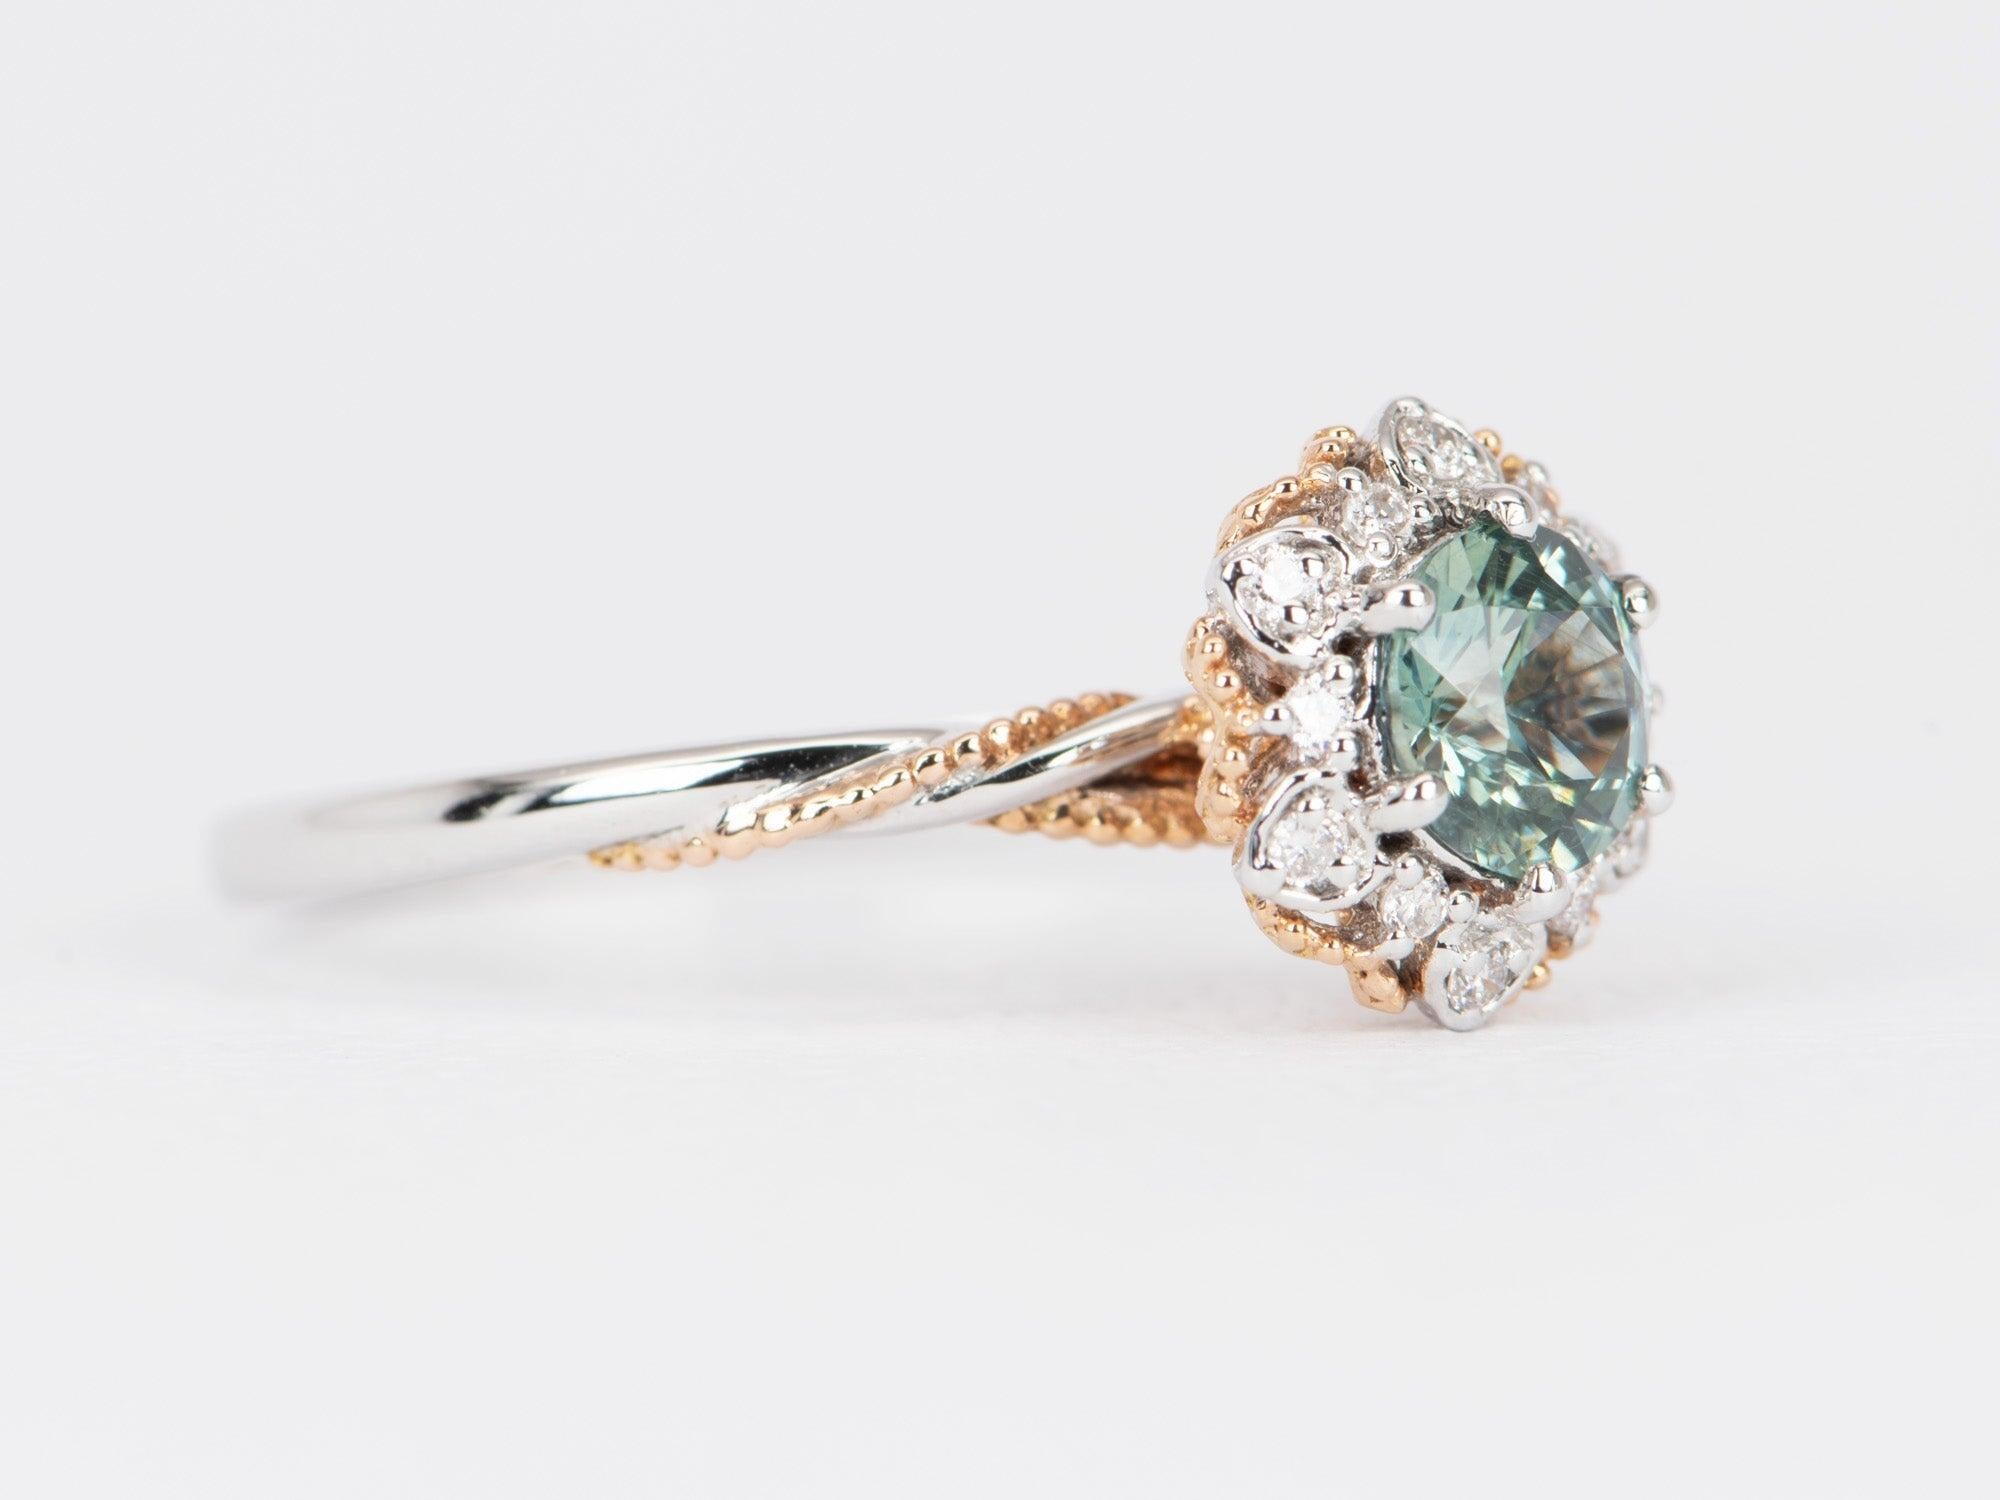 teal engagement rings